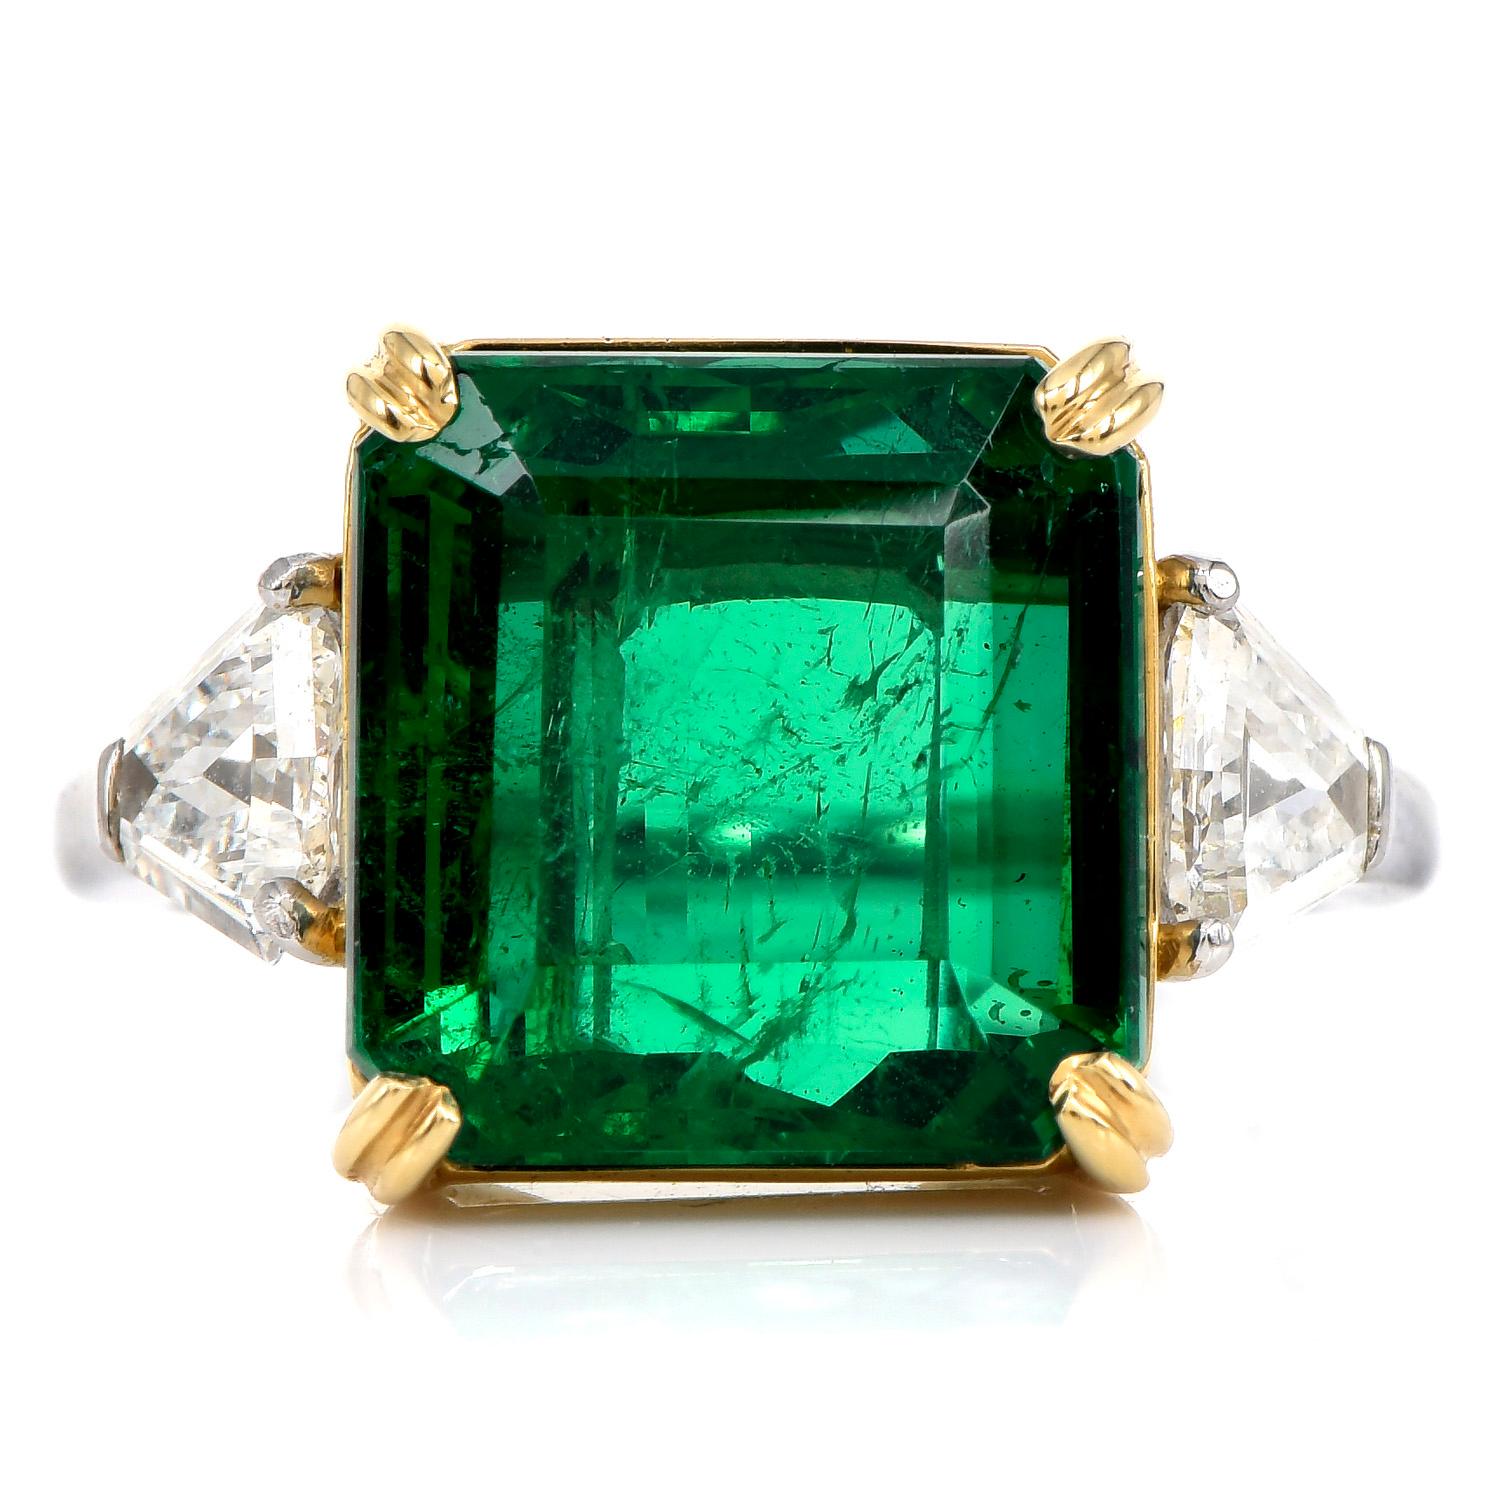 This Intense Green Emerald & Diamond Cocktail Ring is a must for every jewelry box!

Crafted in Platinum with 18K Yellow Gold Bezel, prominently features in the center an AGL Certified Zambian Square High-Quality Emerald, weighing approximately